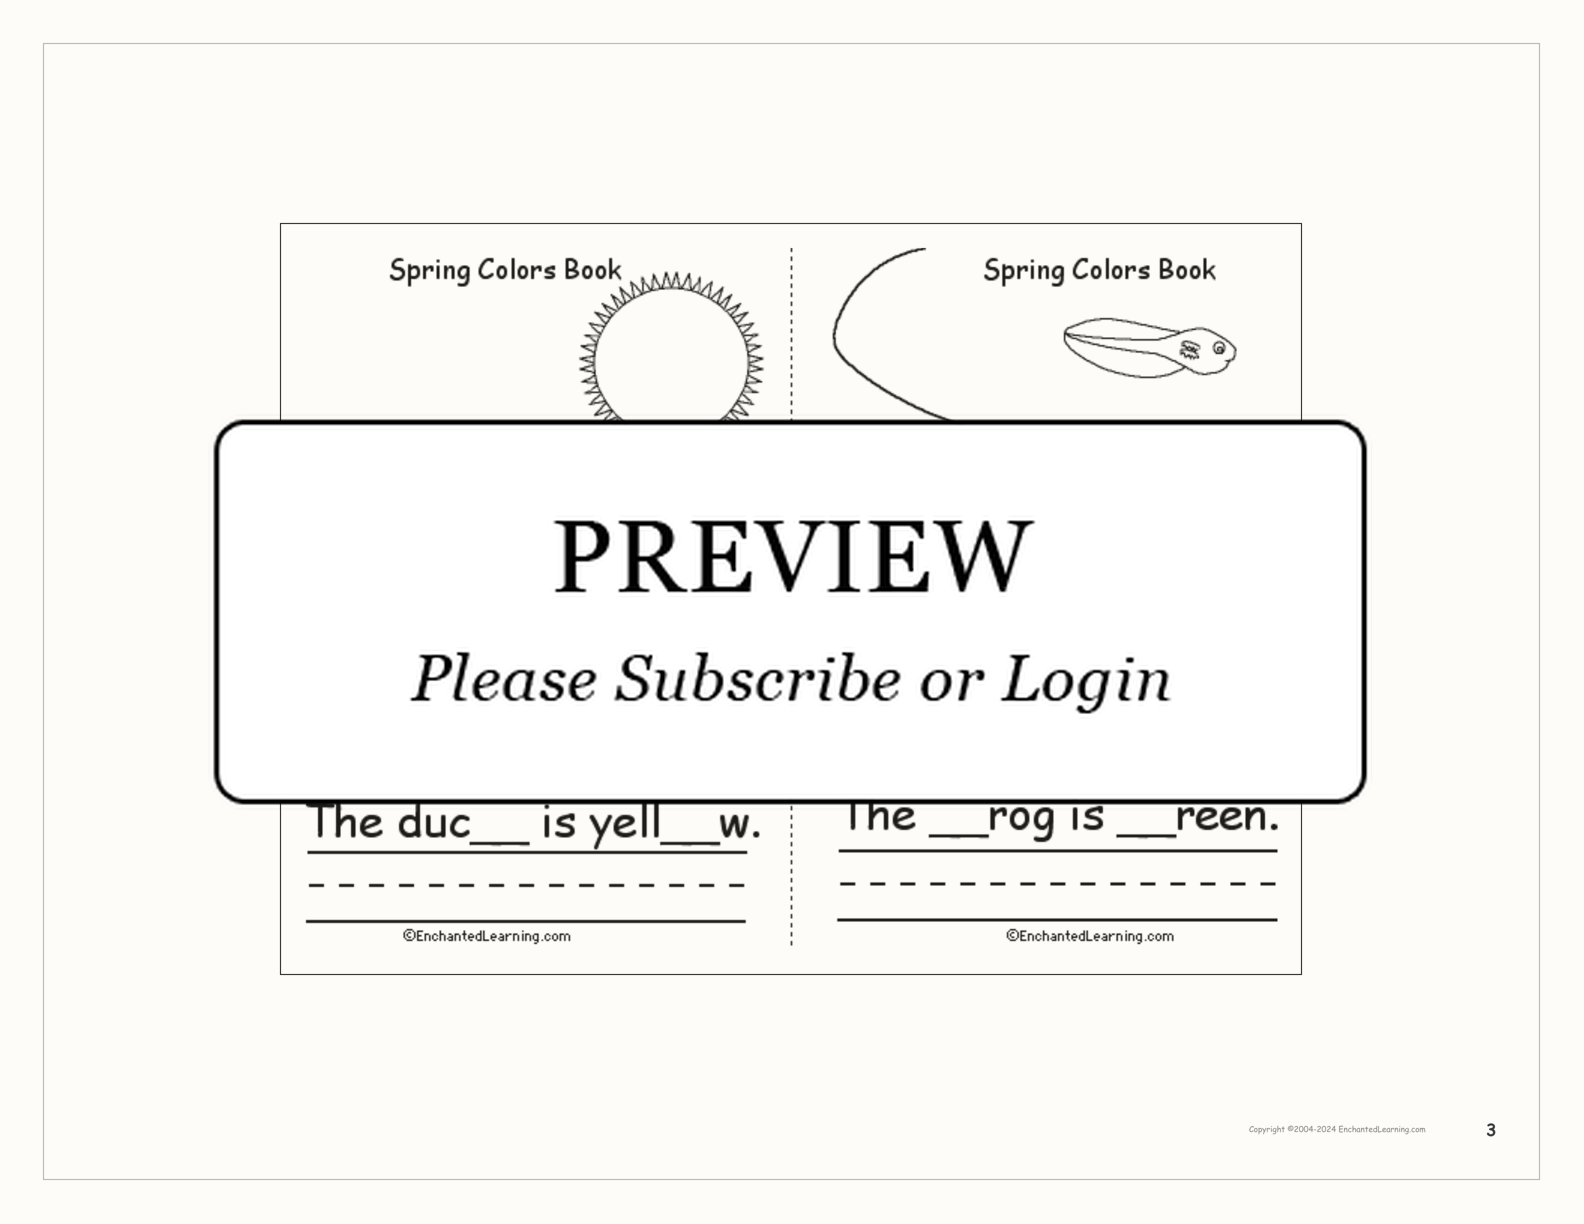 Spring Colors Book interactive worksheet page 3